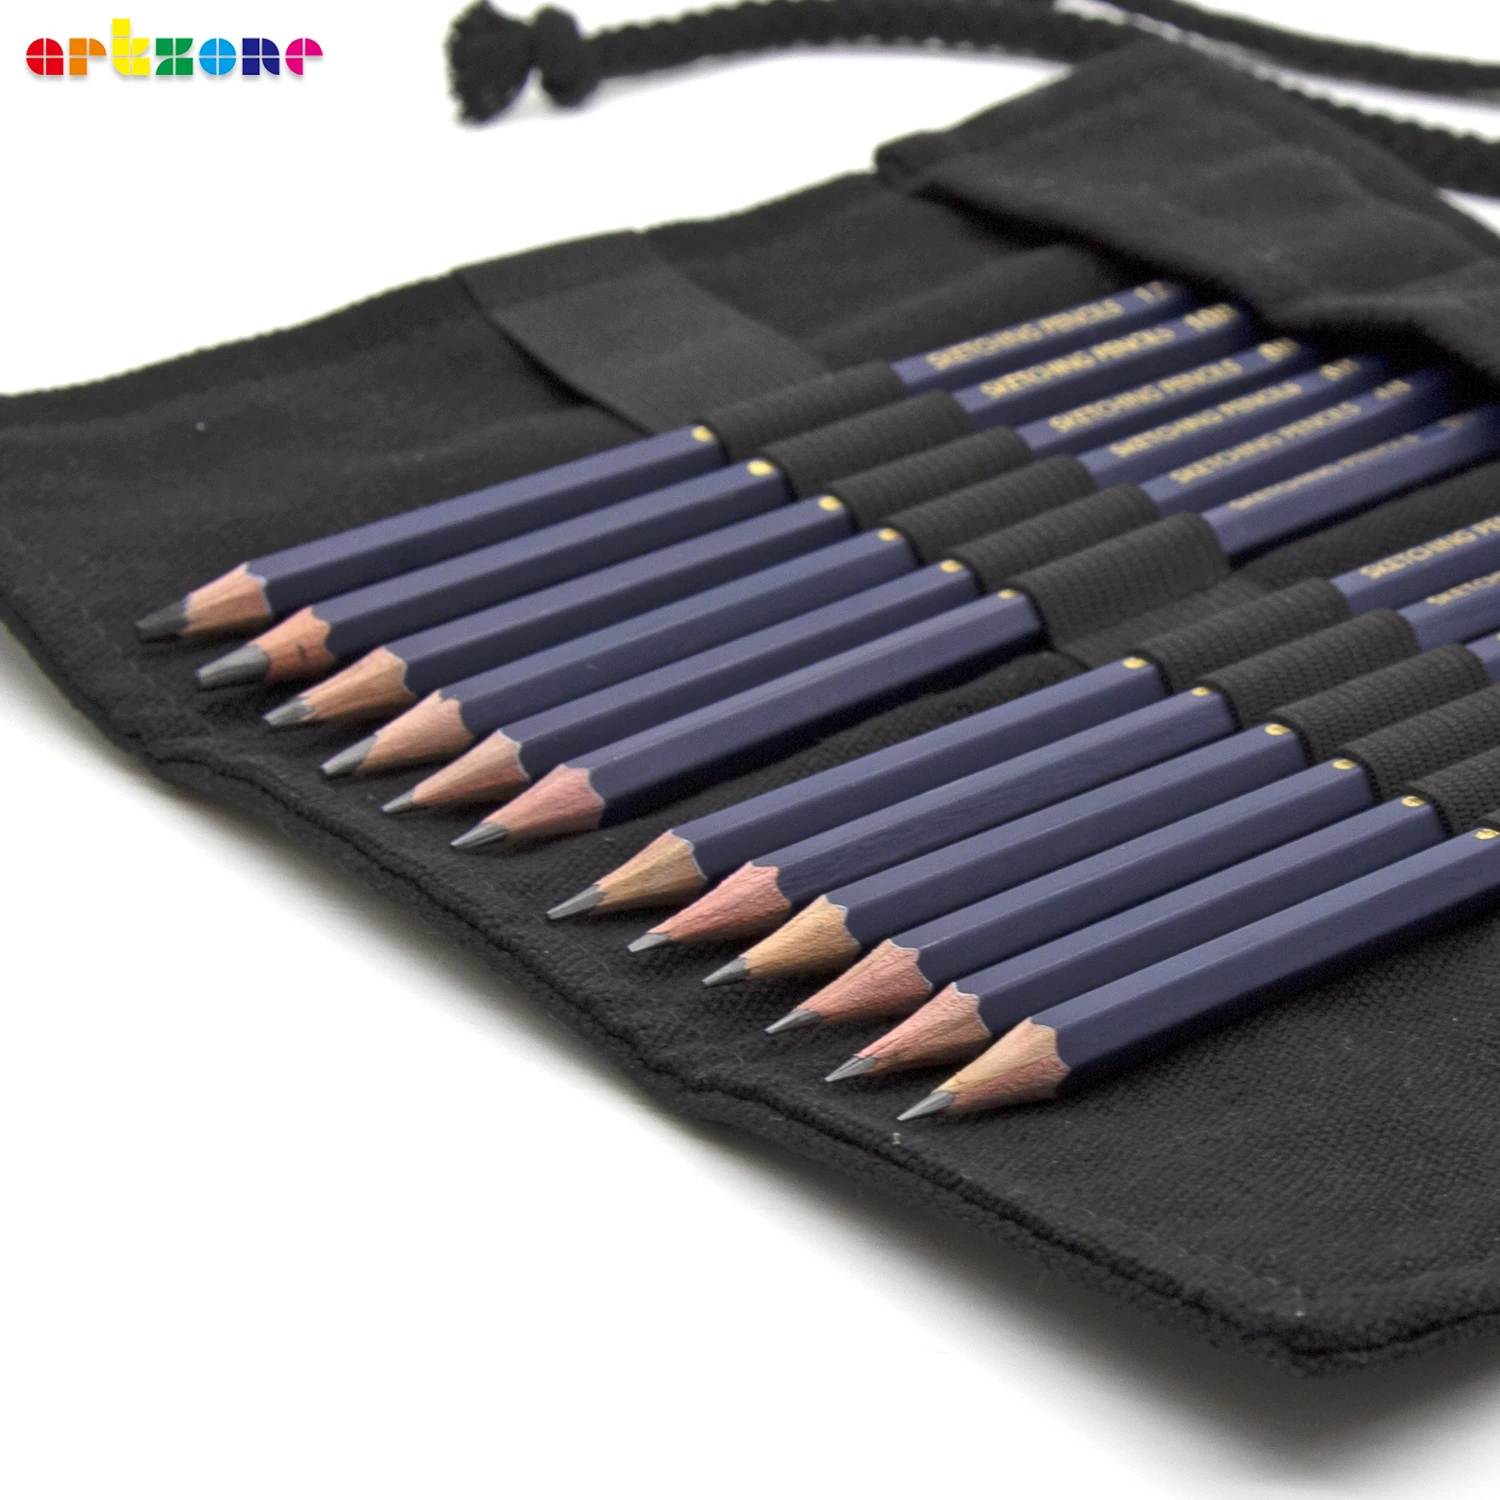 ARTZONE 12Pcs Sketching Graphite Pencils with 12 Holes Canvas Roll Up Case 6H-12B Professional Artist Drawing Pencil Set Art Kit